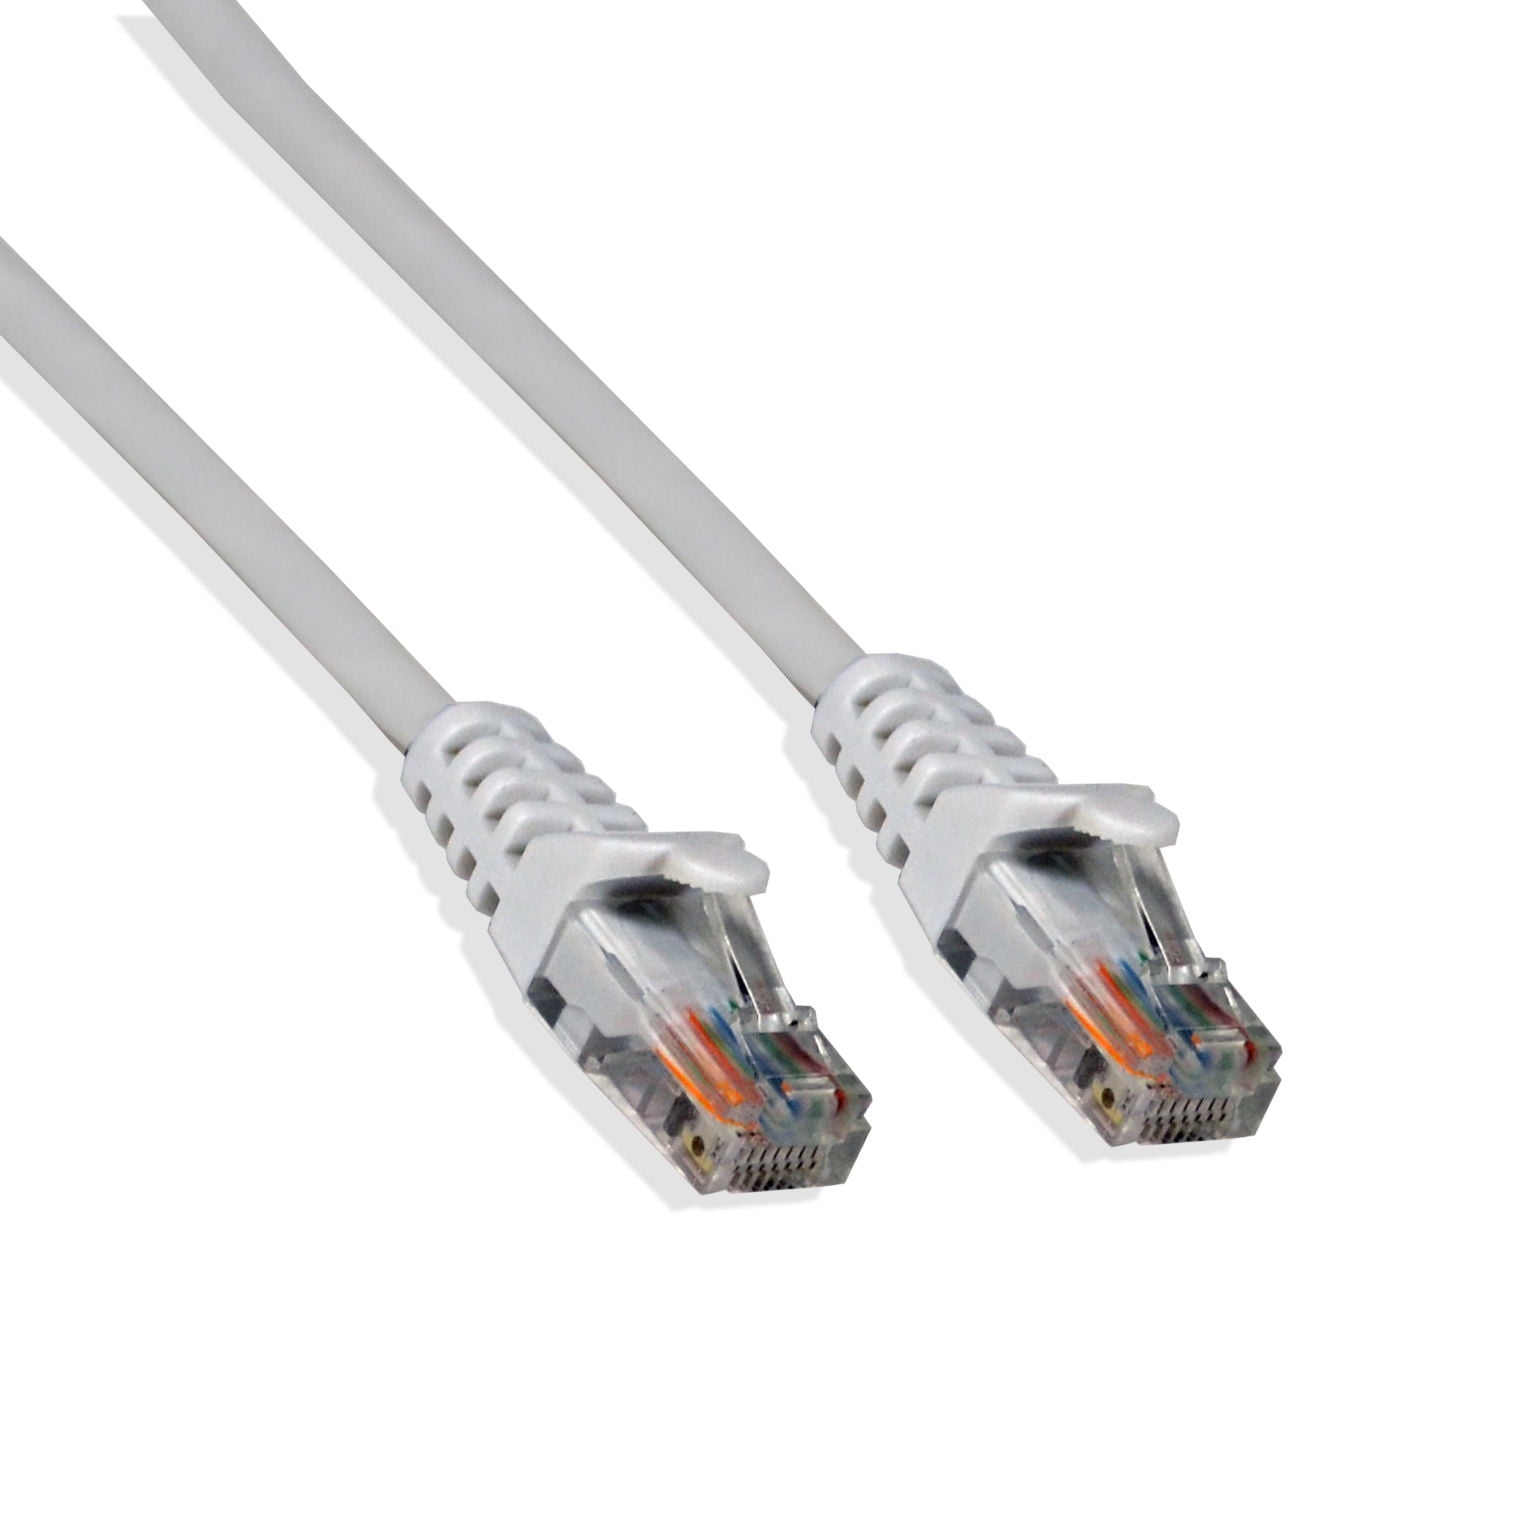 50Ft Cat6 Ethernet RJ45 Lan Wire Network White UTP 50 Feet Patch Cable (5 Pack)